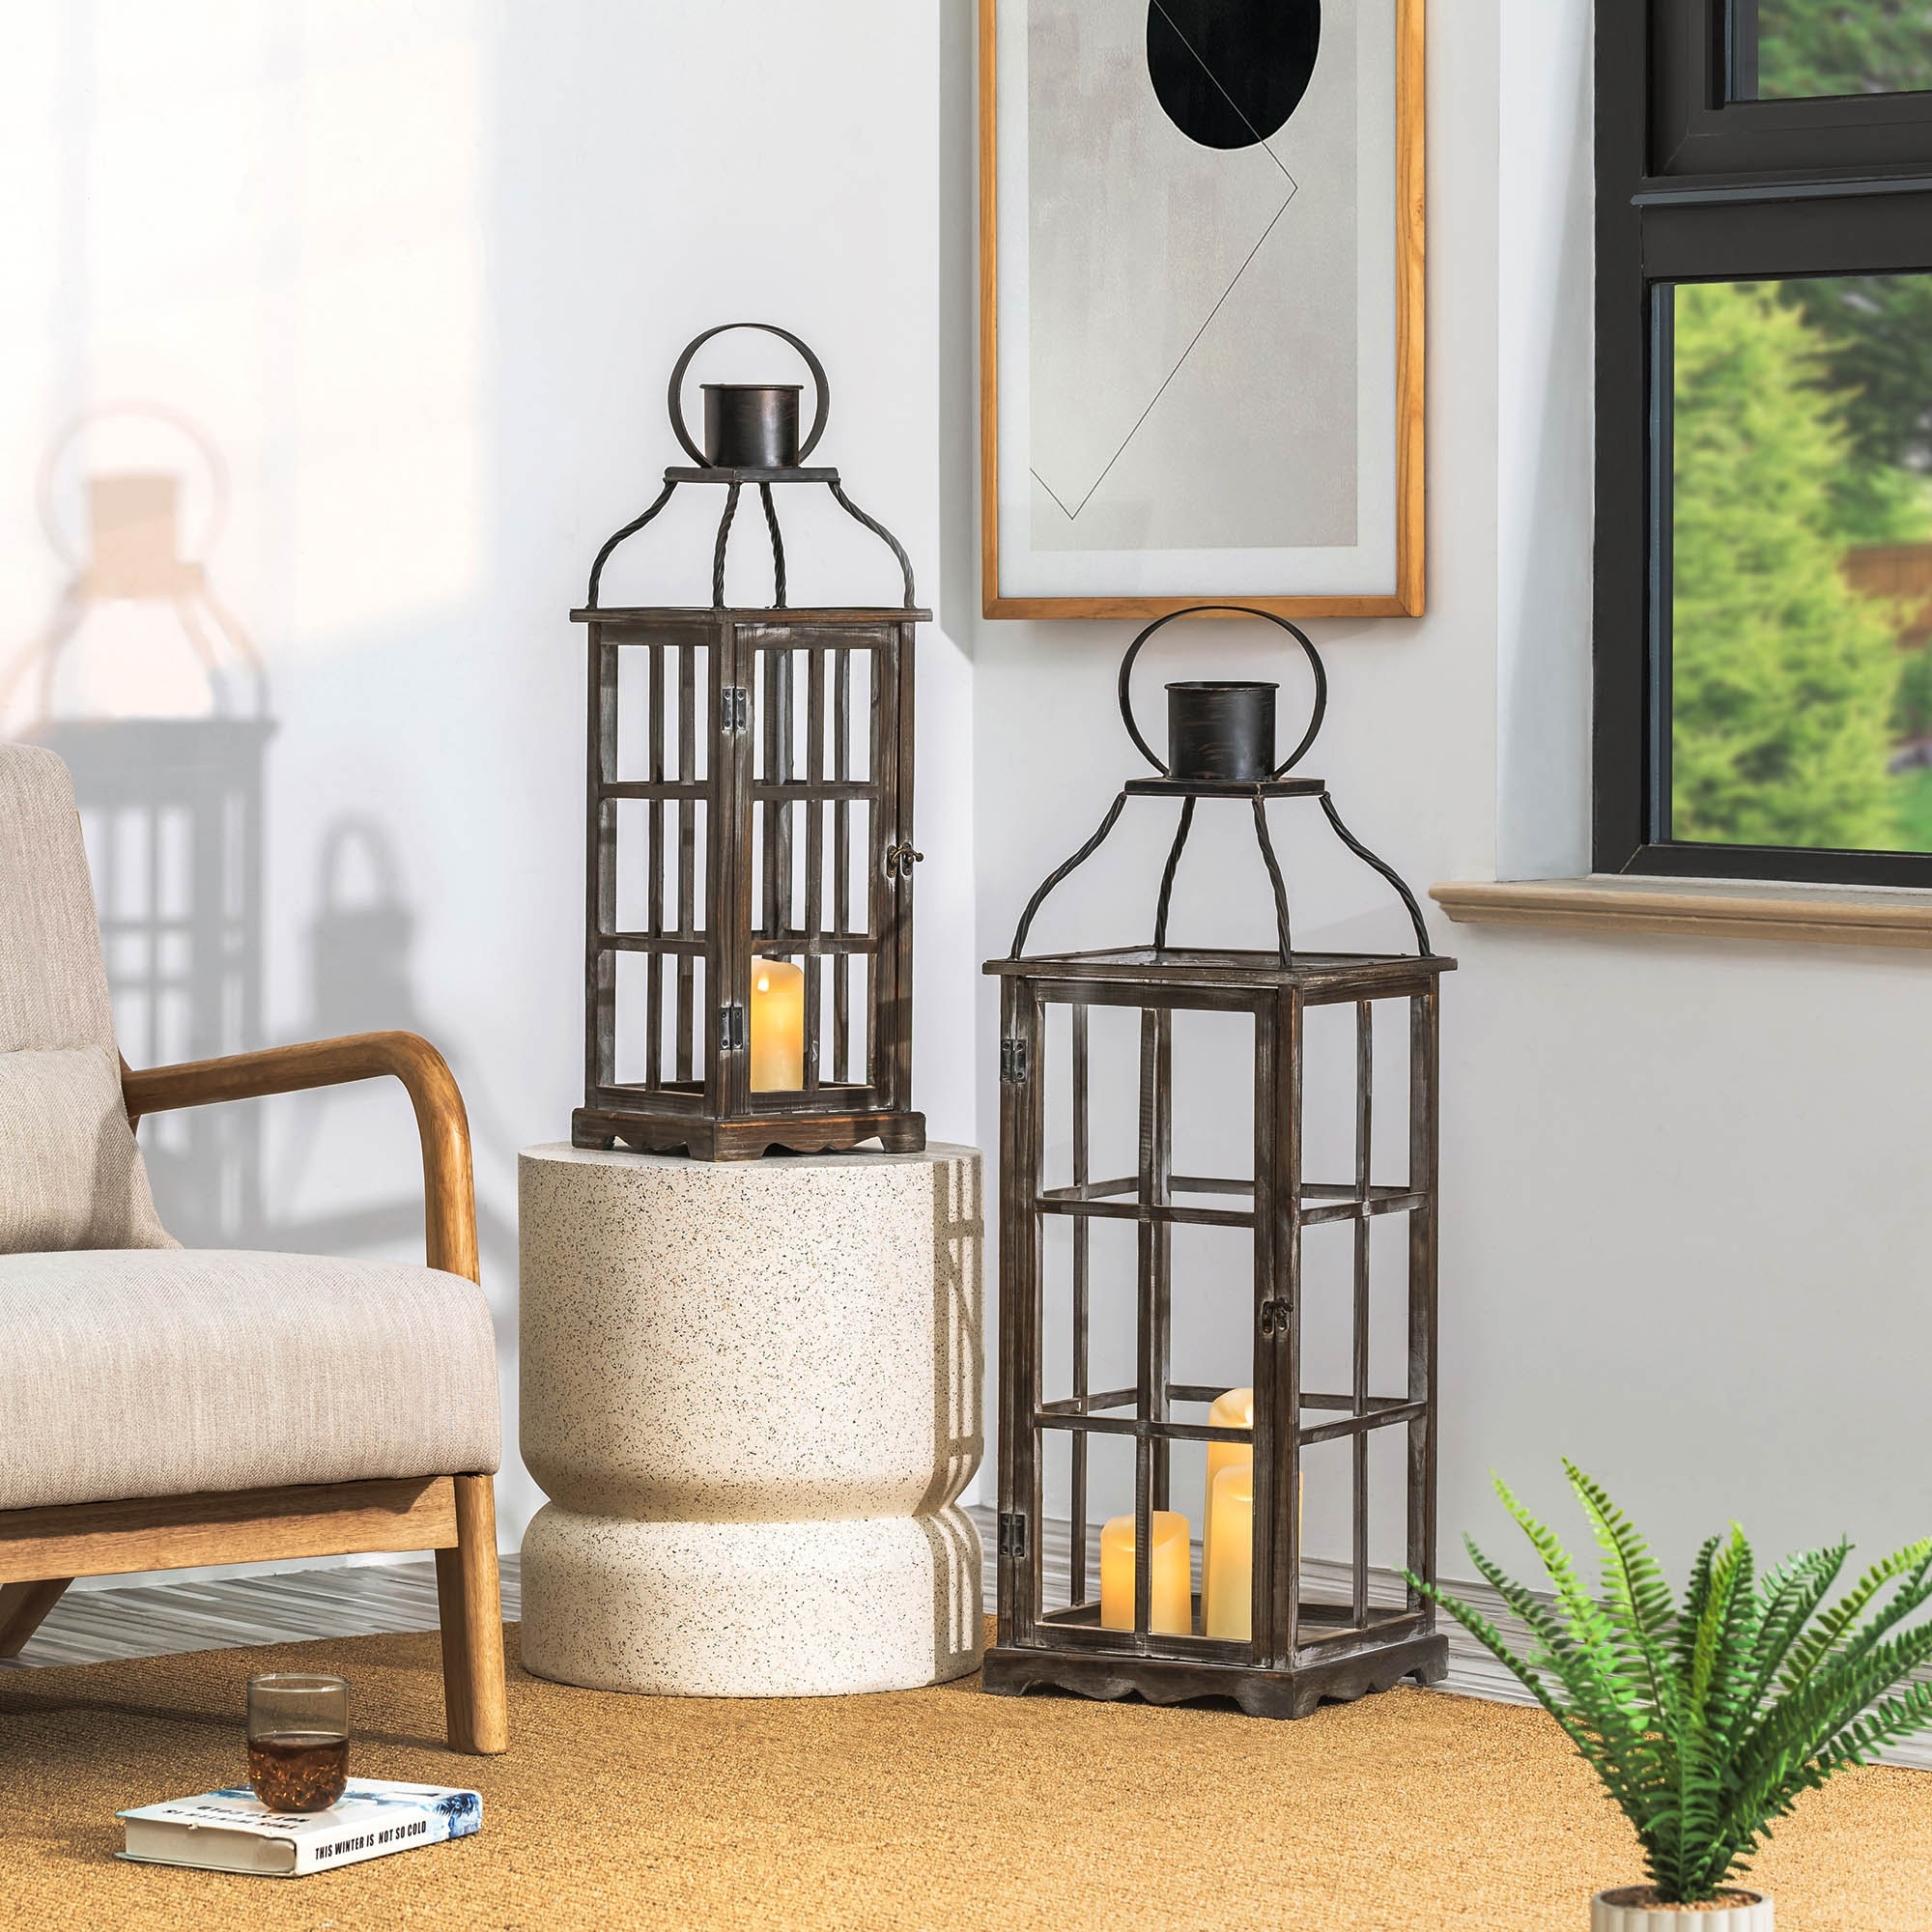 https://ak1.ostkcdn.com/images/products/is/images/direct/56d52484a4e215a039845b9b60b989d79dce4e84/Glitzhome-Oversized-Farmhouse-Wooden-Metal-Lanterns-%28Set-of-2%29.jpg